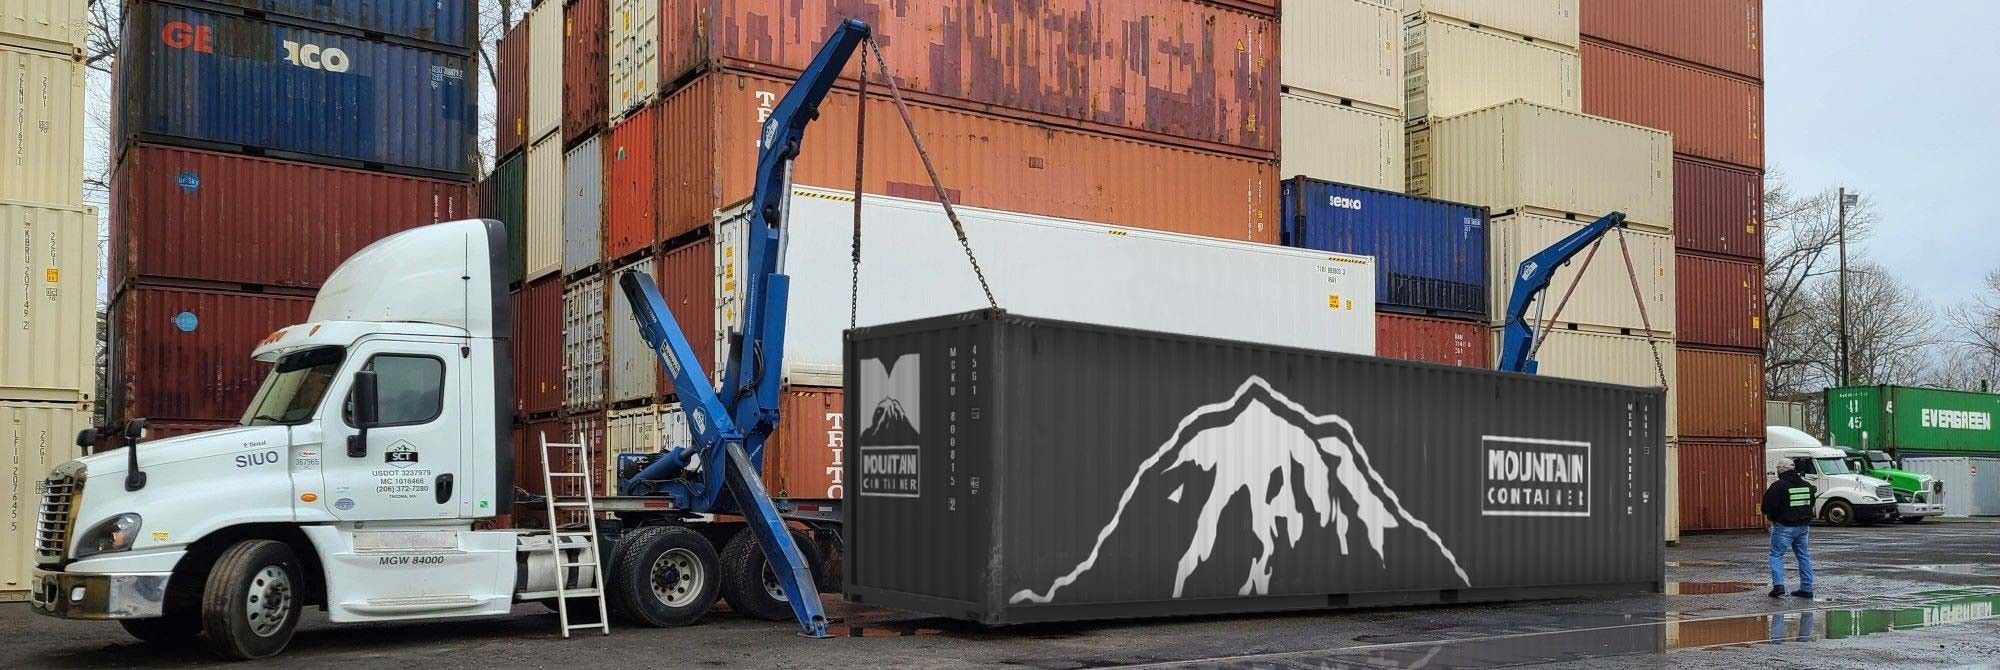 Grey Mountain Container Shipping container being loaded onto the back of a semi-truck using a side lifter in a shipping container lot. 